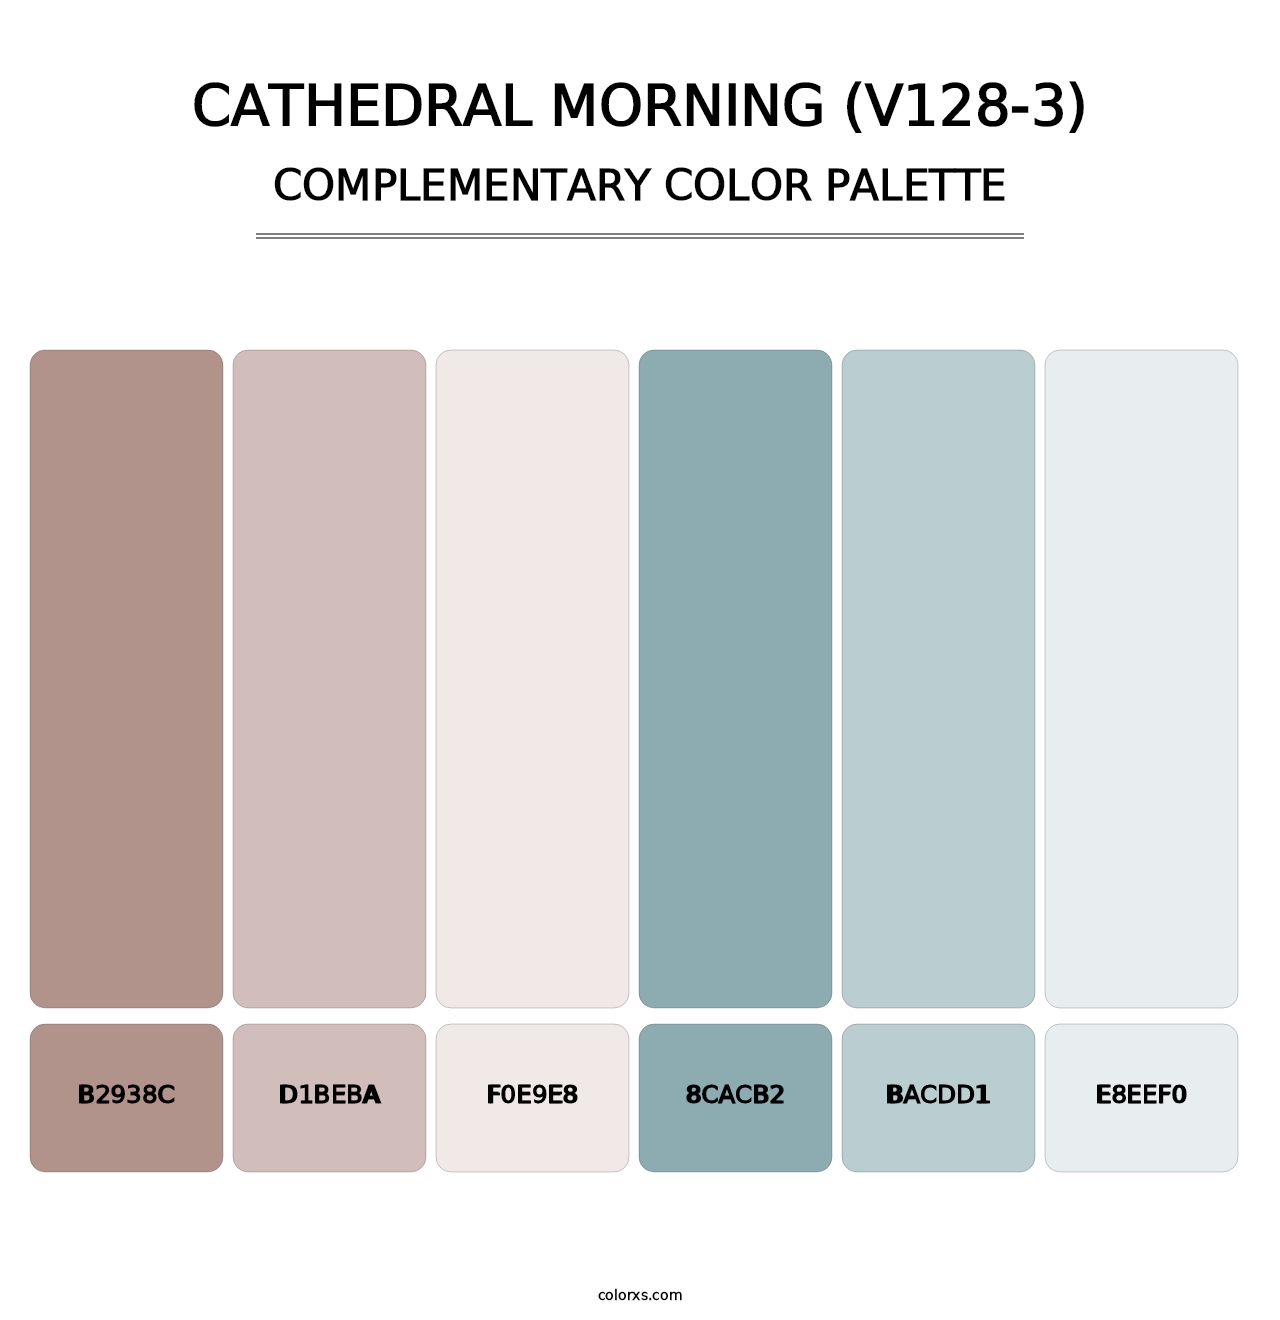 Cathedral Morning (V128-3) - Complementary Color Palette